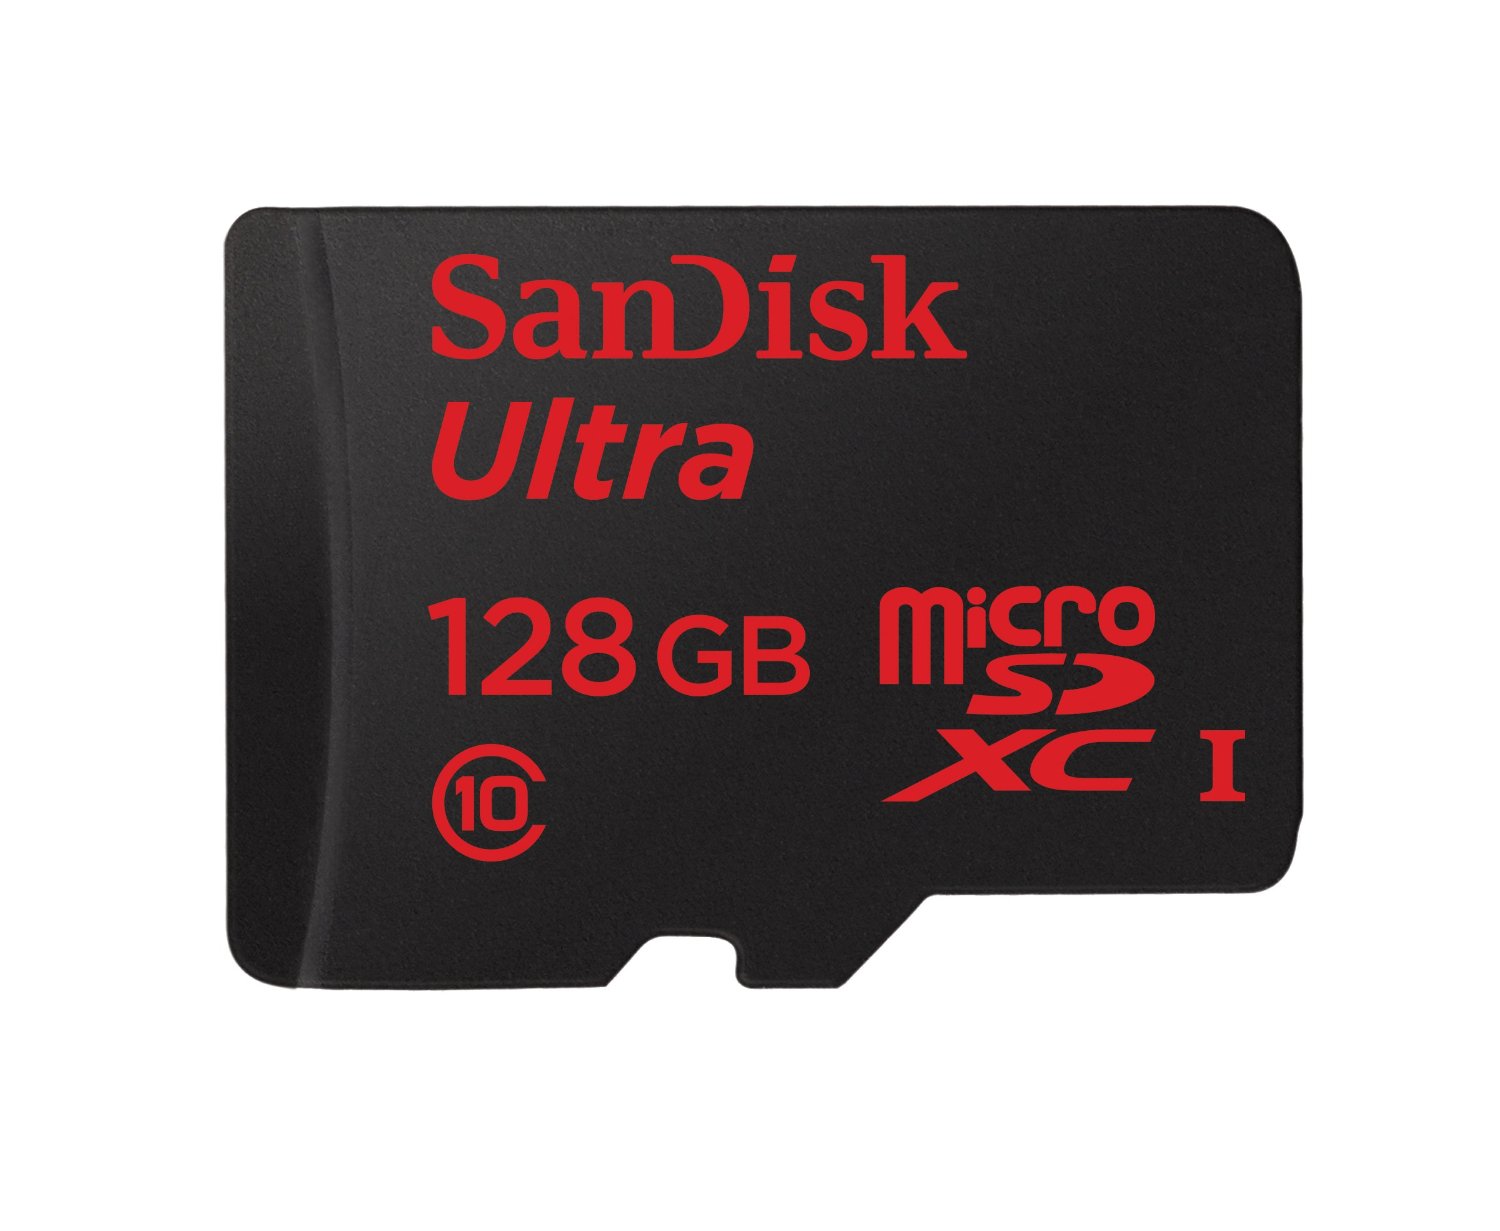 SanDisk Ultra 128GB microSDXC UHS-I Card with Adapter, Black, Standard Packaging 